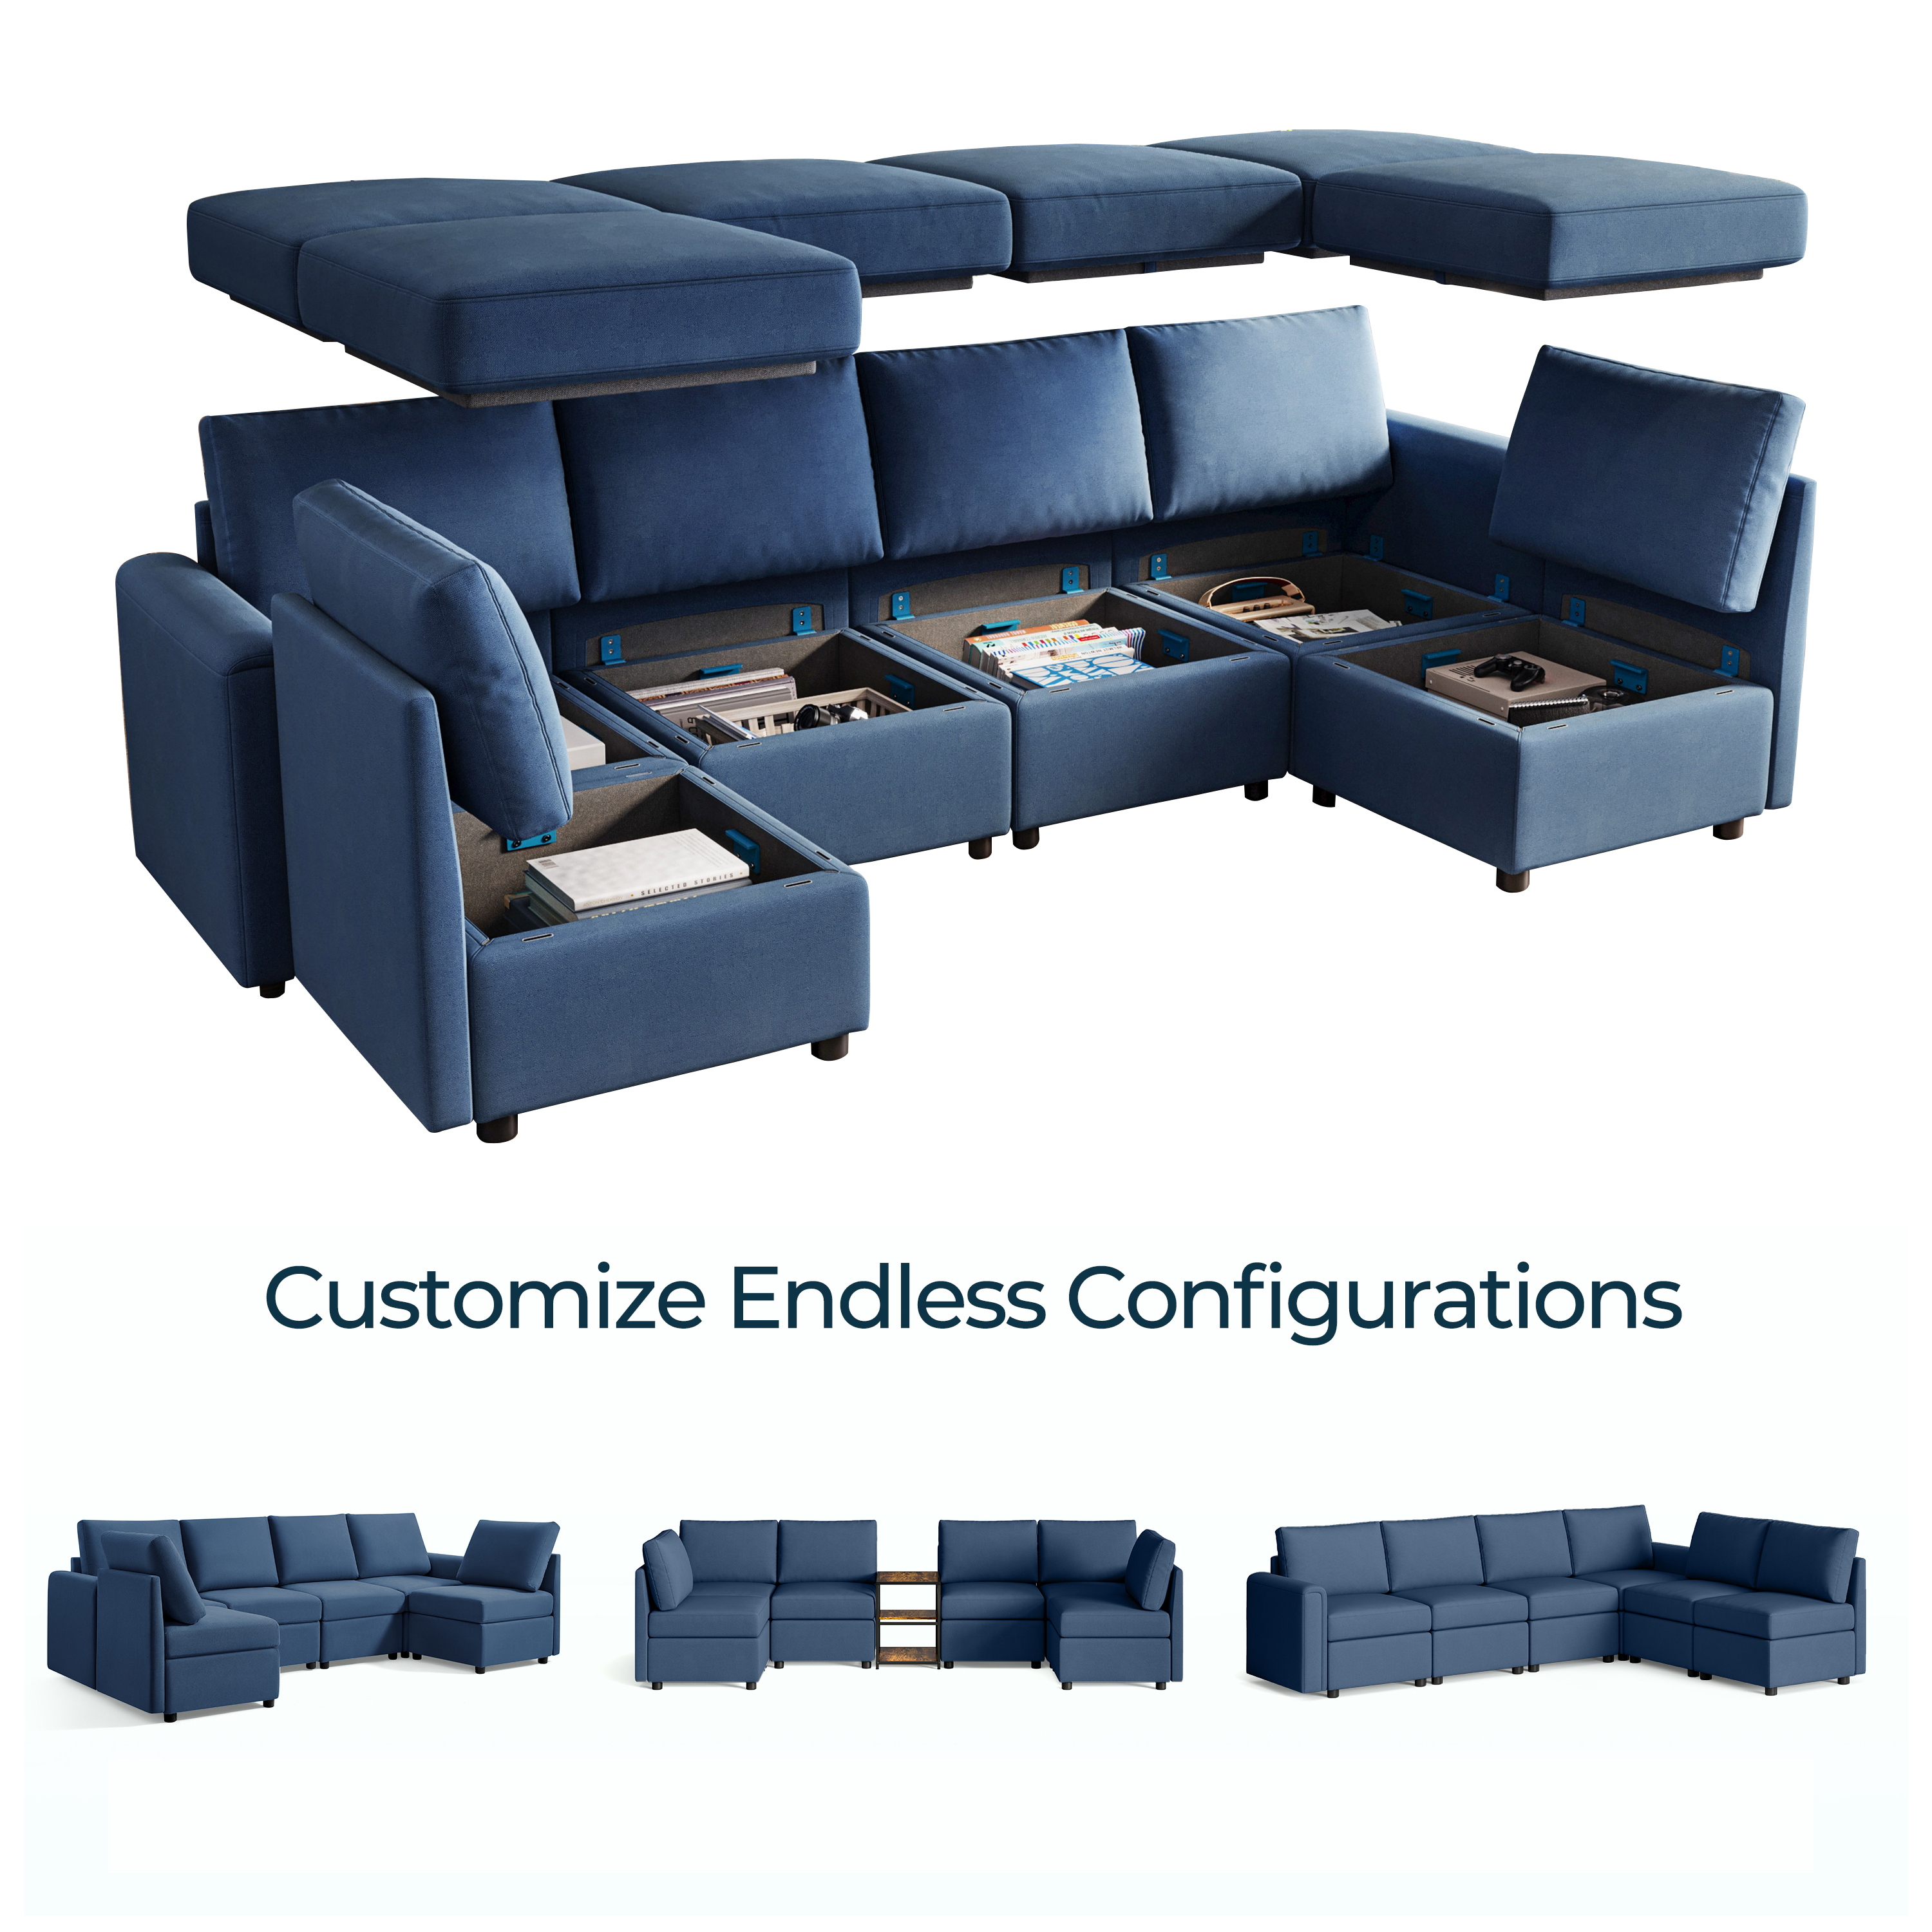 LINSY HOME Modular Couches and Sofas Sectional with Storage Sectional Sofa U Shaped Sectional Couch with Reversible Chaises, Blue - image 1 of 11